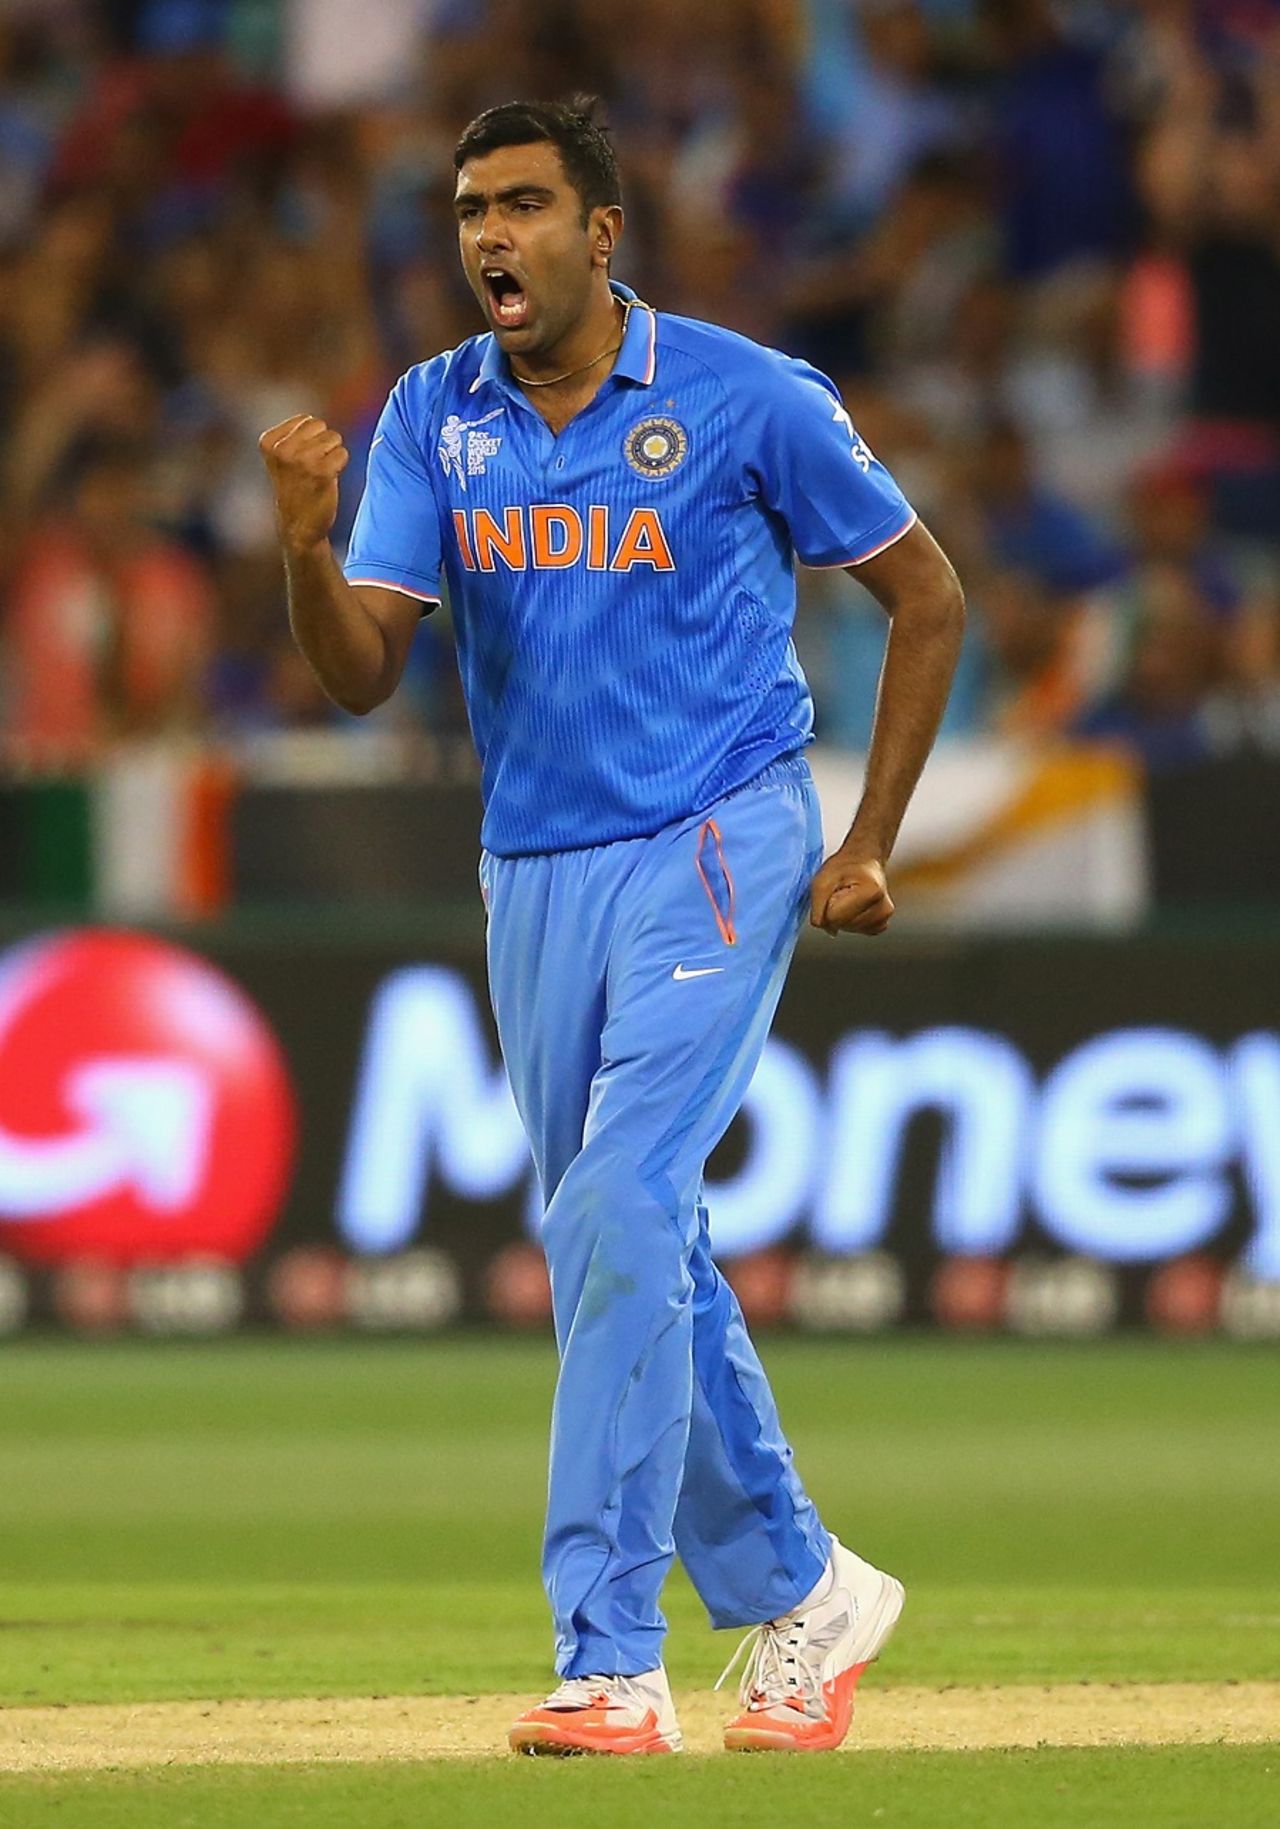 R Ashwin roars after taking a wicket, India v South Africa, World Cup 2015, Group B, Melbourne, February 22, 2015